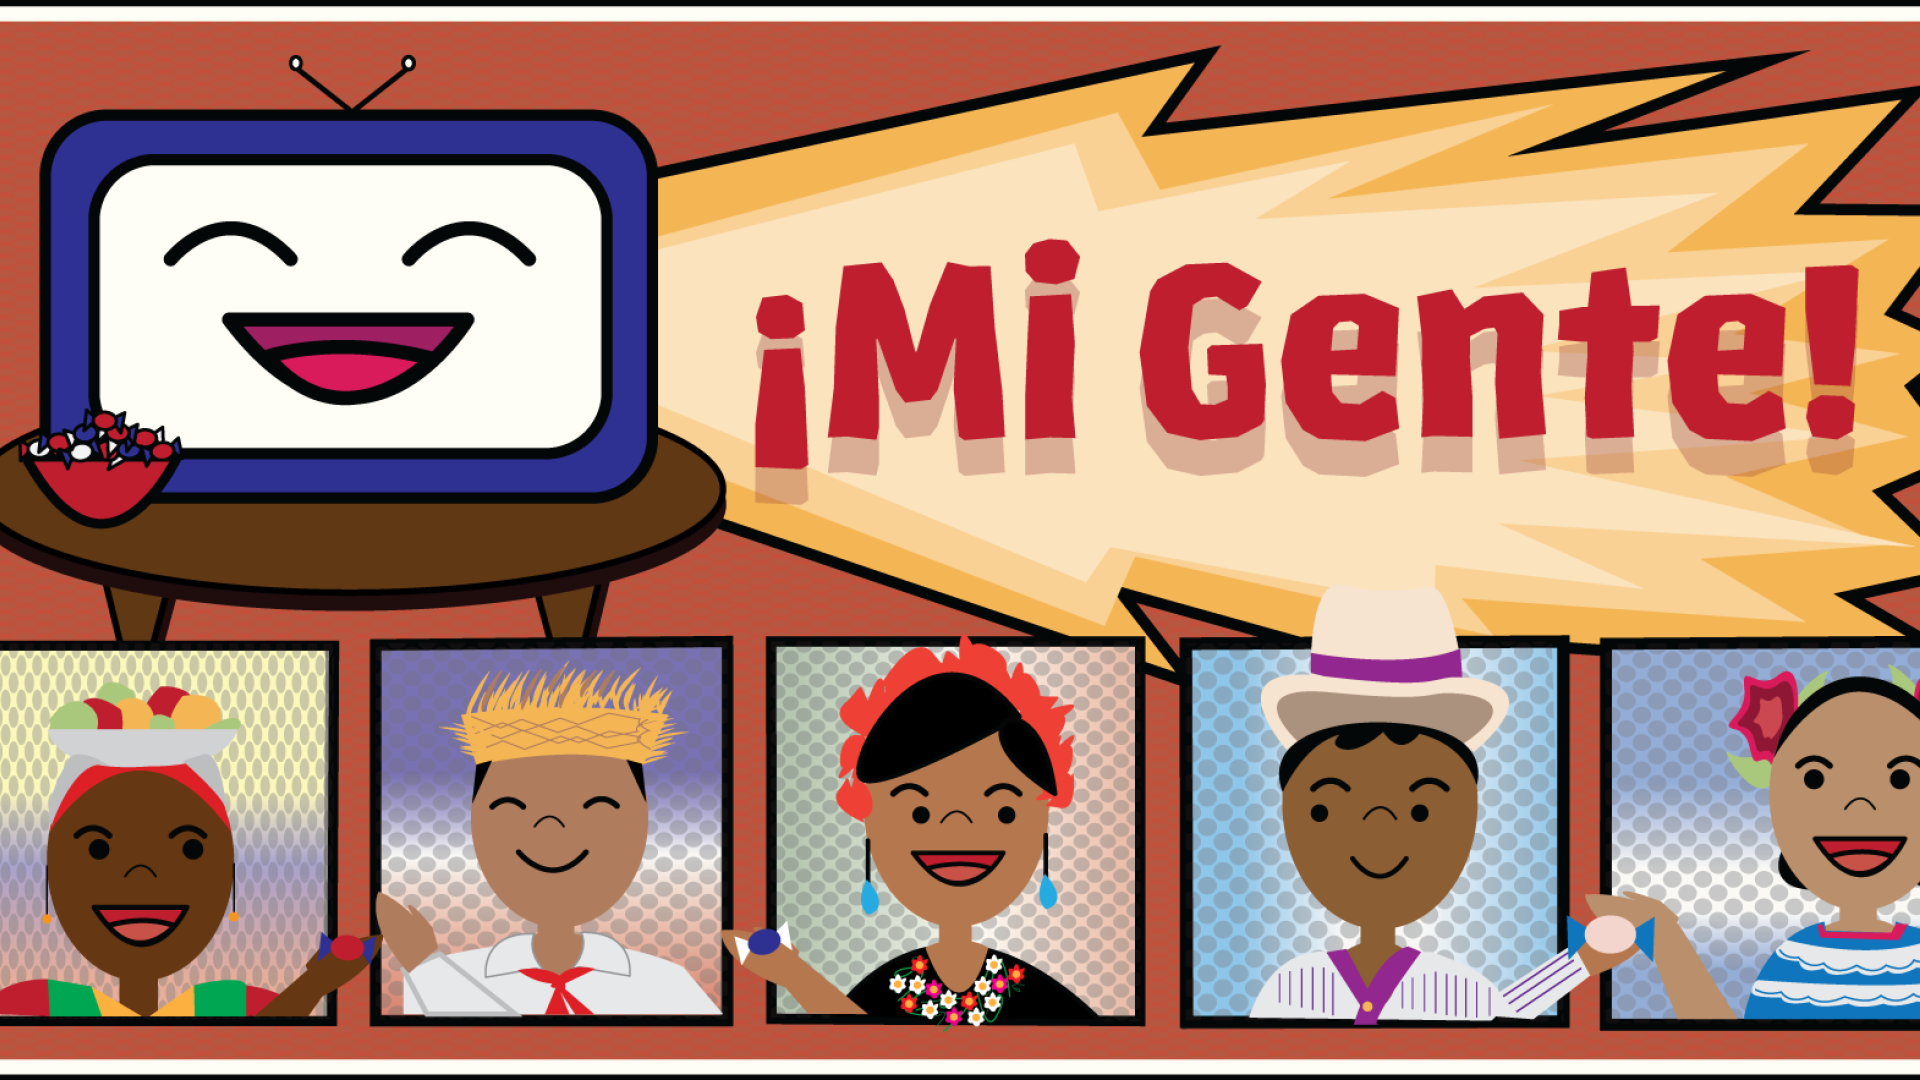 Image of 5 people of varying identities within the Latin American community in front of a smiling TV with the title "¡Mi Gente!" in big red text. 